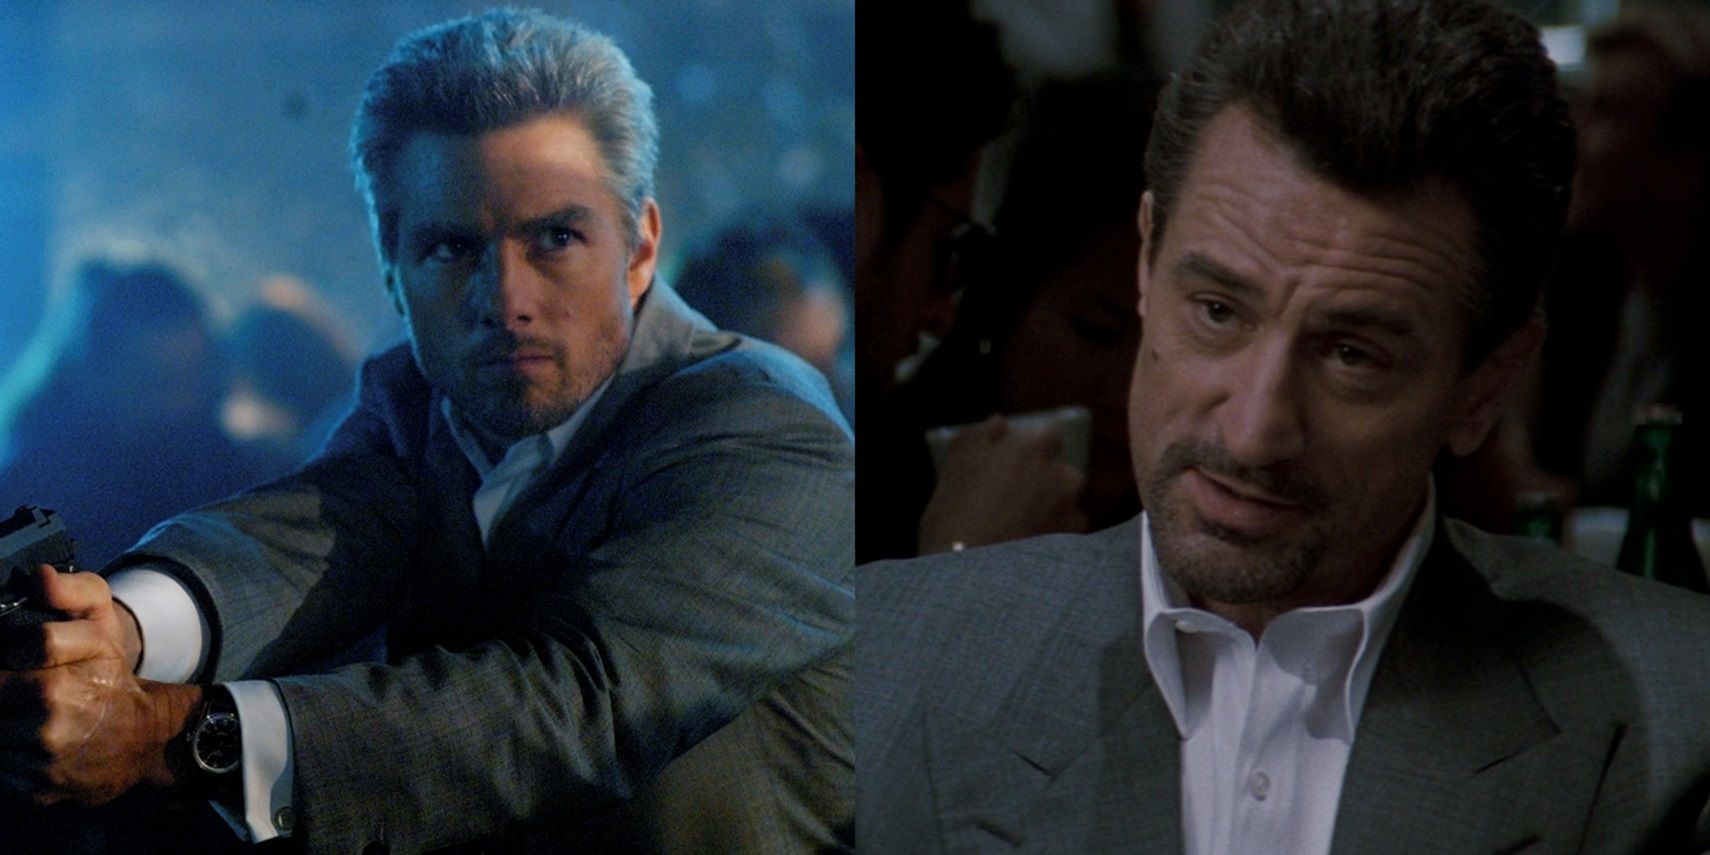 Tom Cruise in Collateral and Robert De Niro in Heat